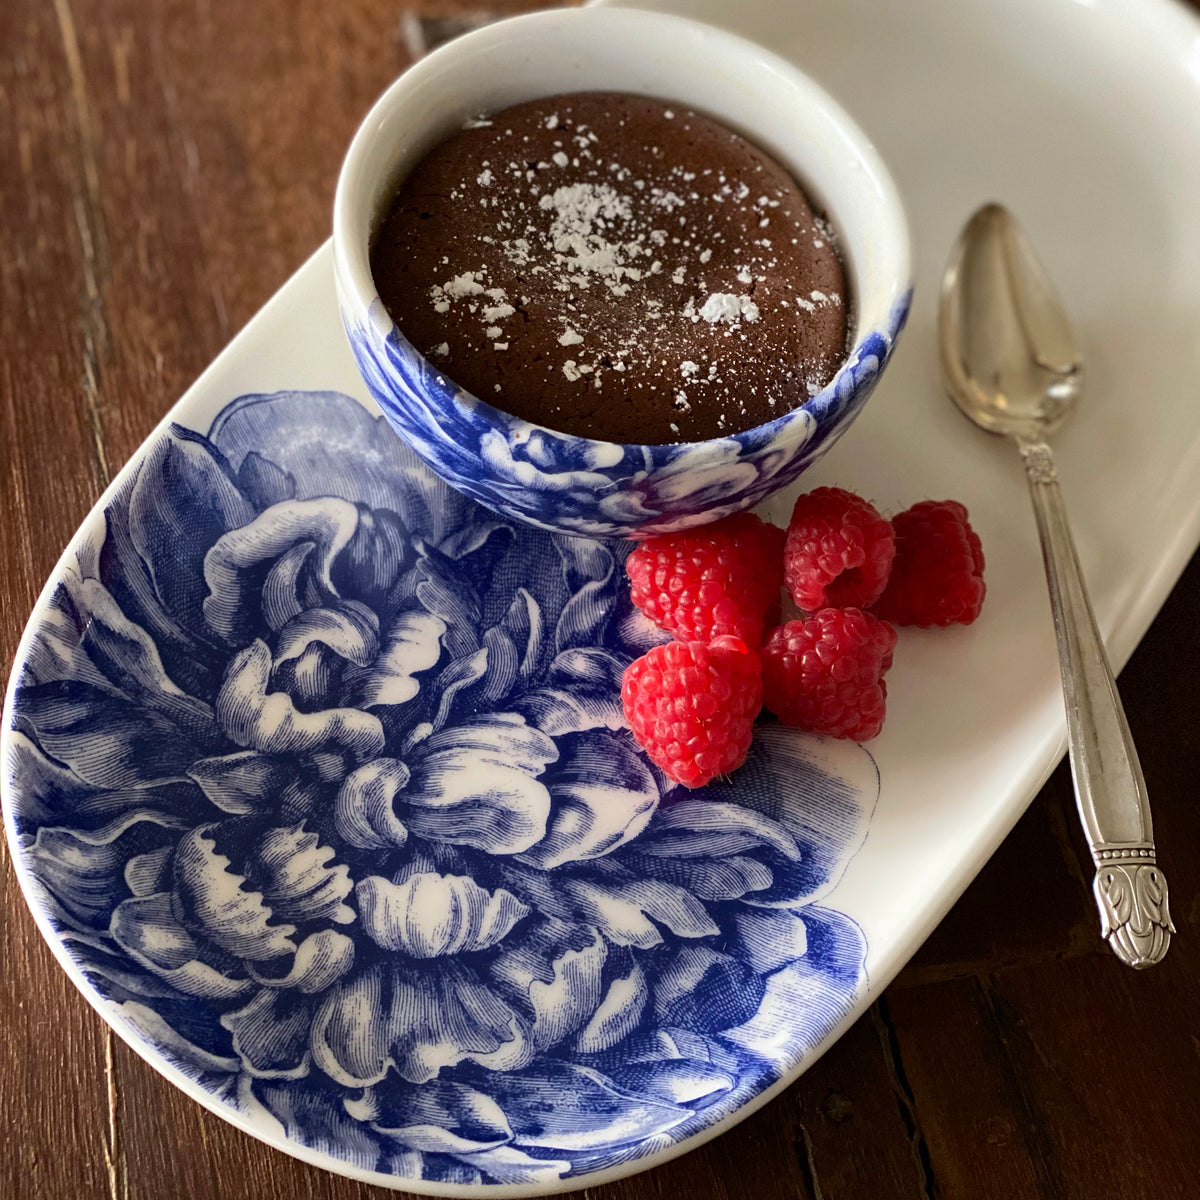 A chocolate dessert in a blue and white floral-patterned bowl on a Peony Small Oval Tray by Caskata Artisanal Home, accompanied by a spoon and four raspberries, all pieces from our exquisite blue and white dinnerware collection.